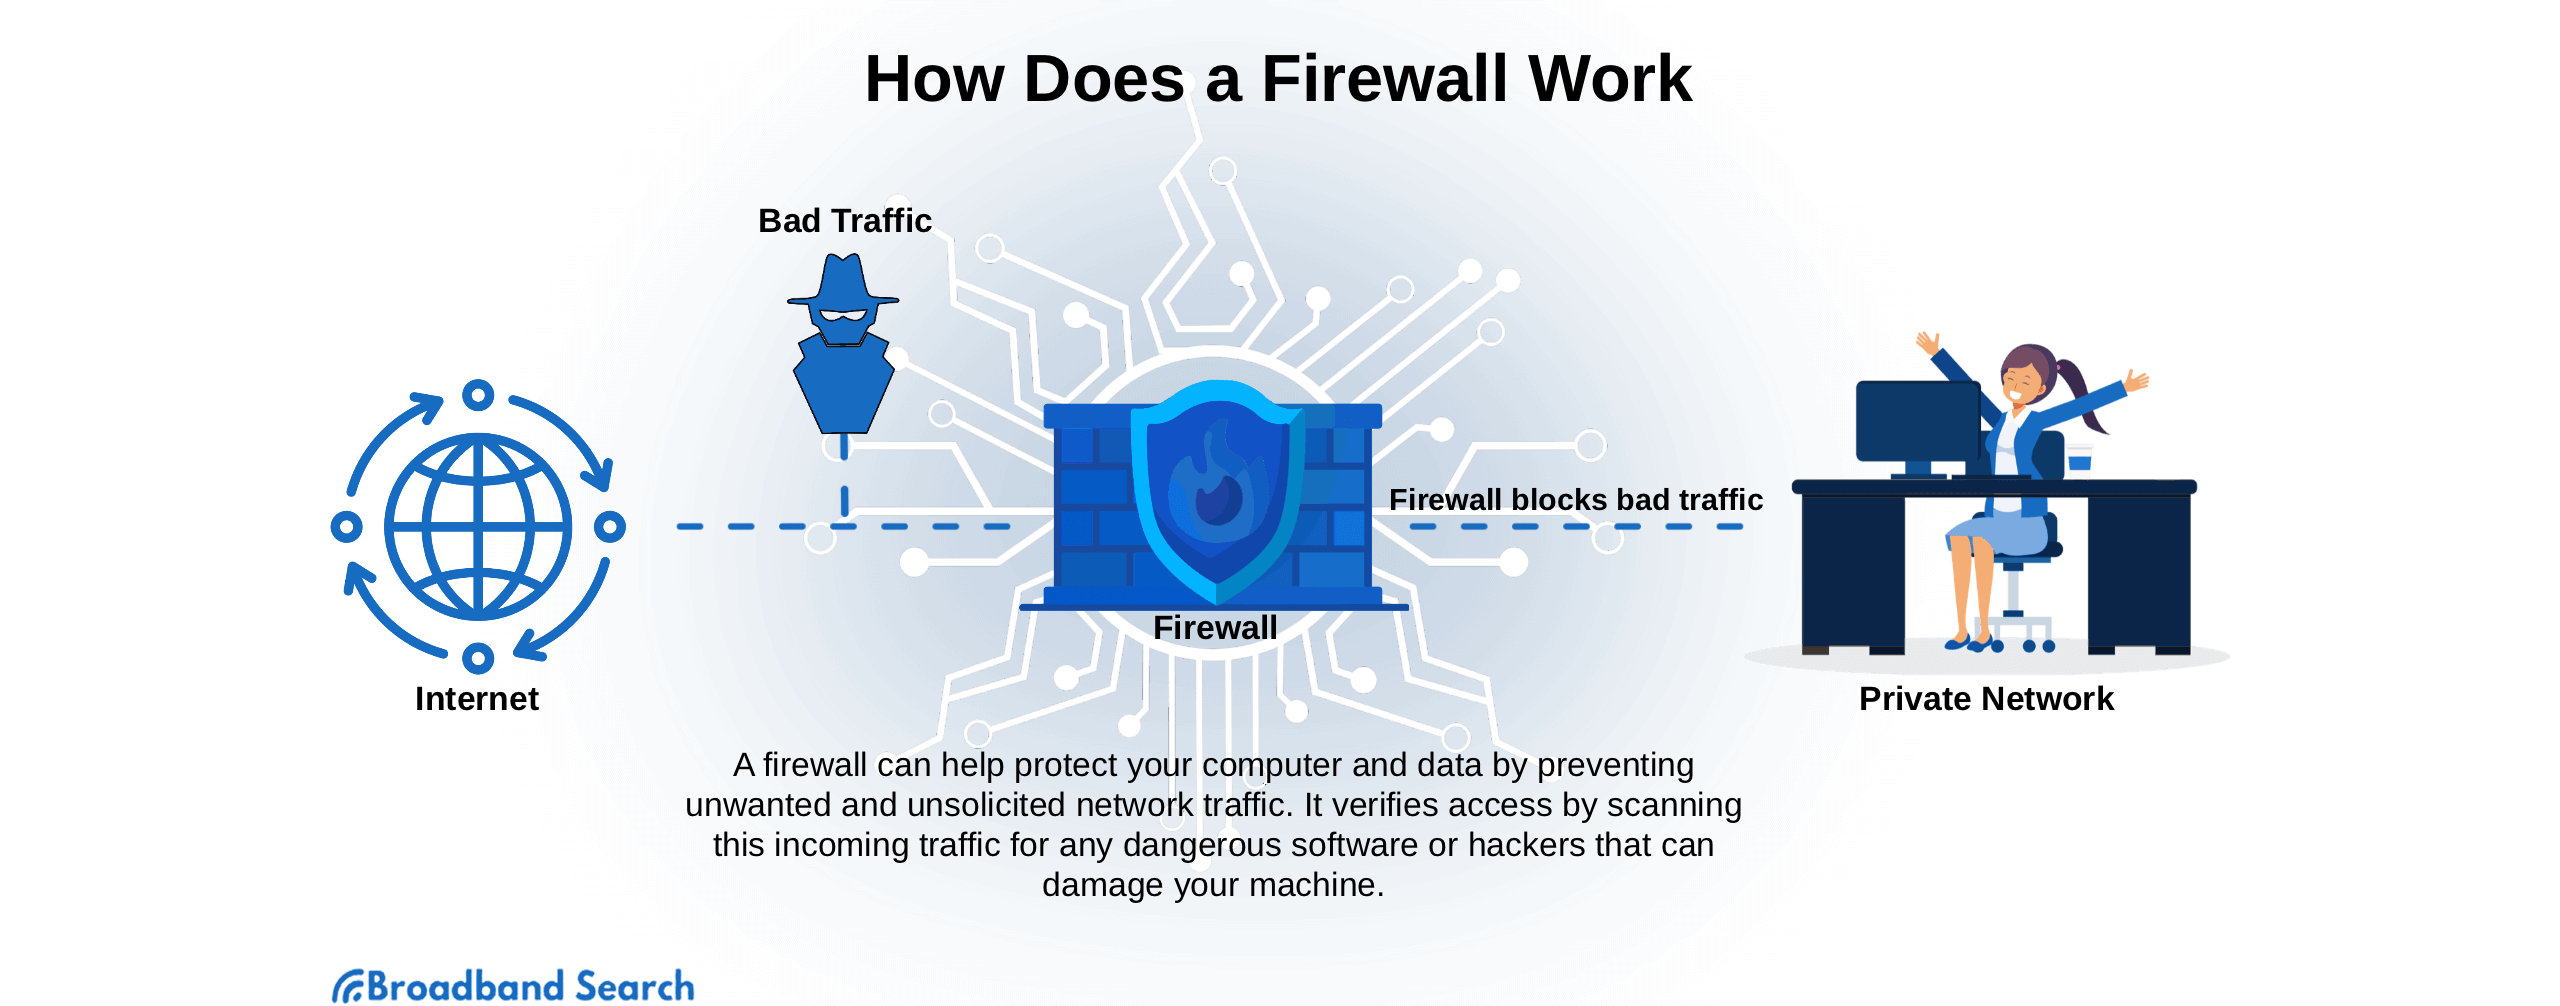 How does a firewall work